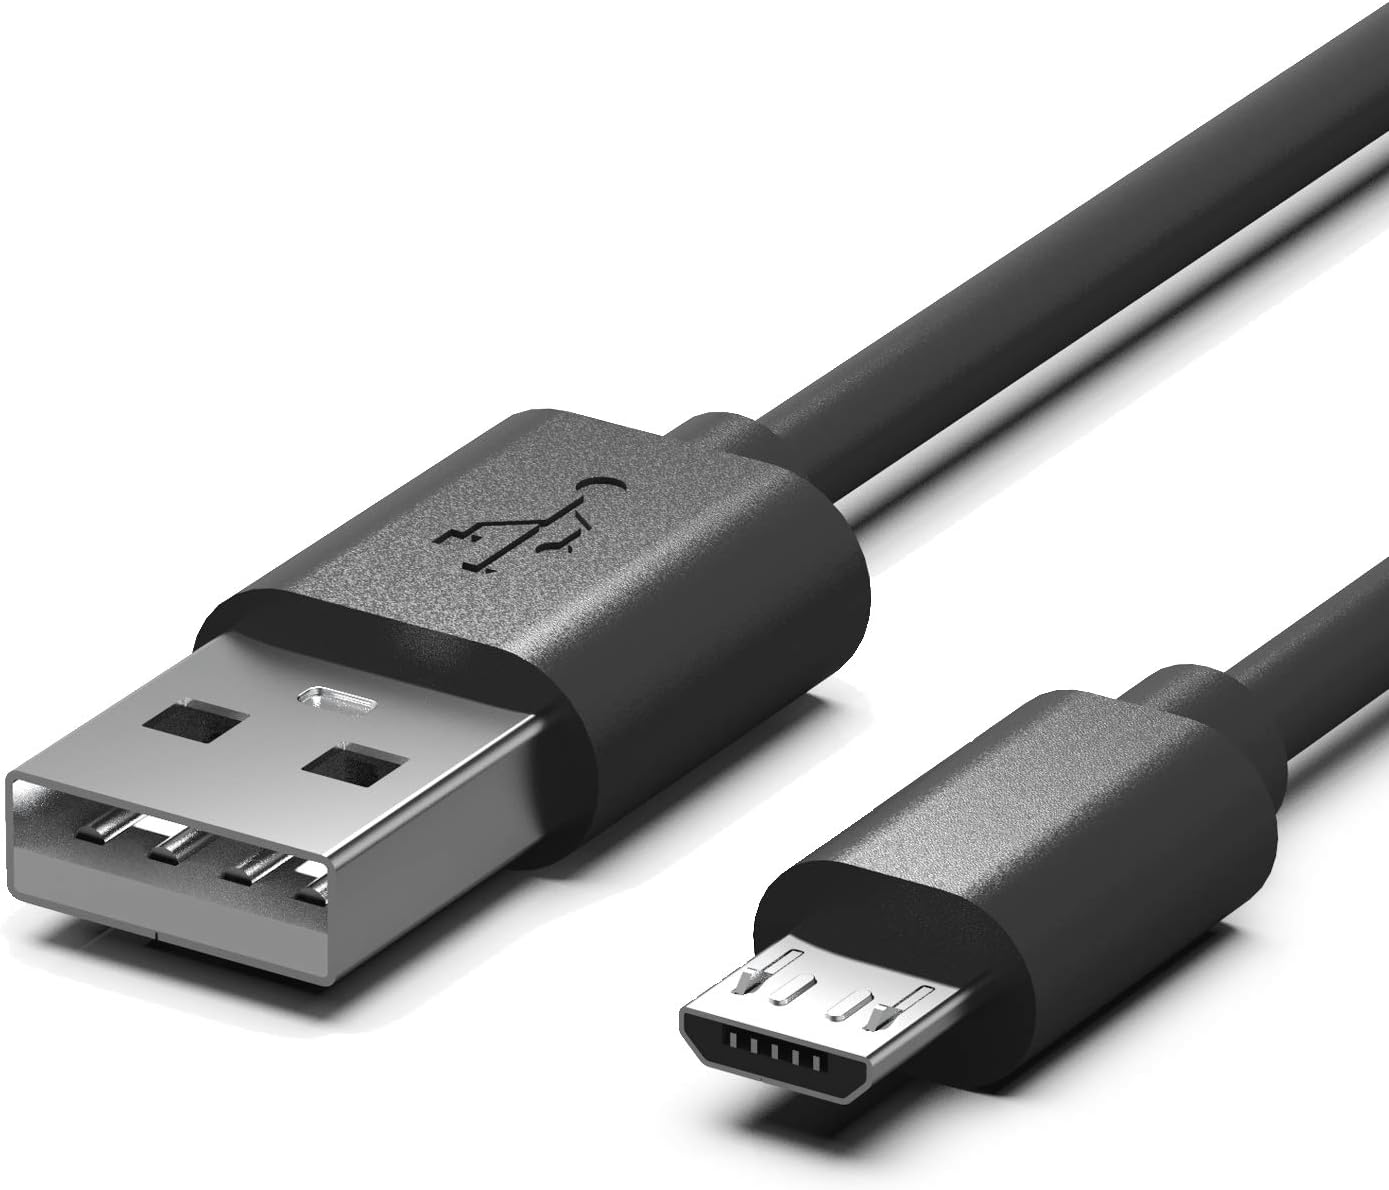 Warning: USB Charger Scam Alert! Protect Yourself and Stay Safe.